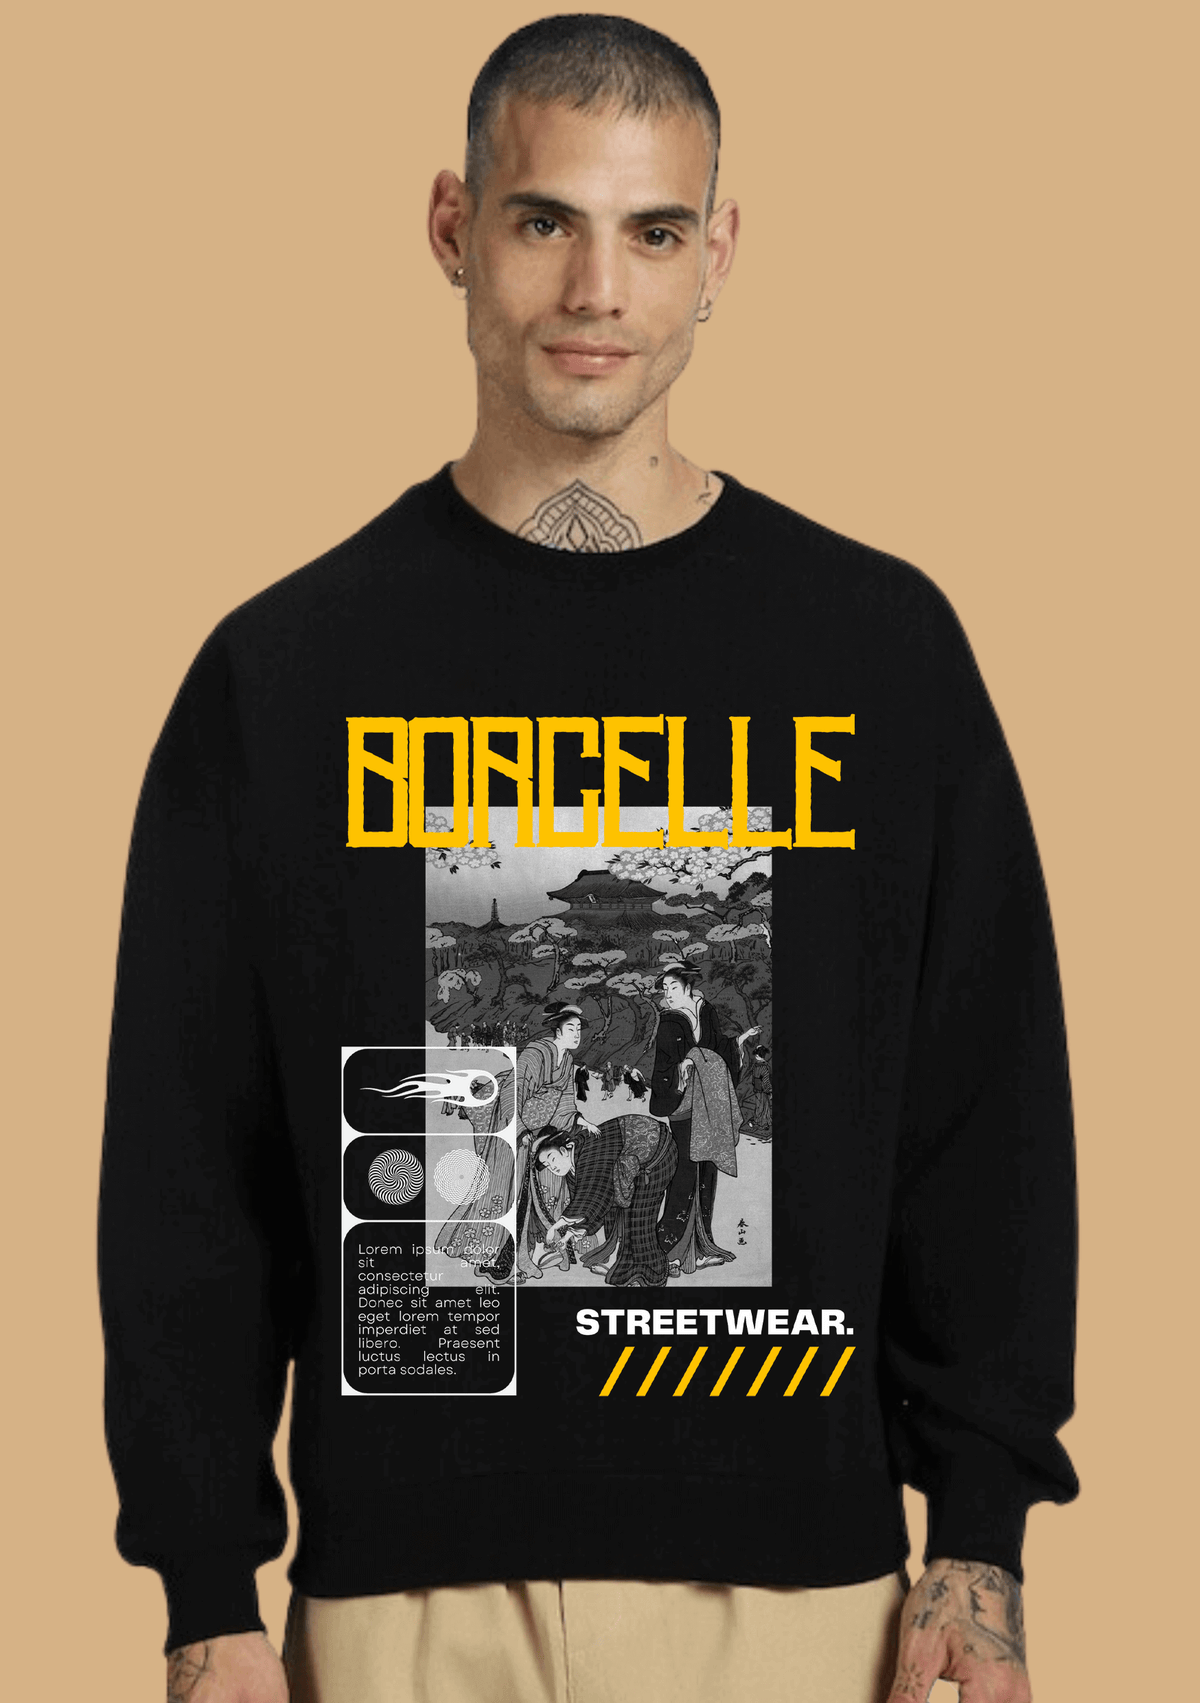 Borcelle Printed Black Sweatshirt By Offmint